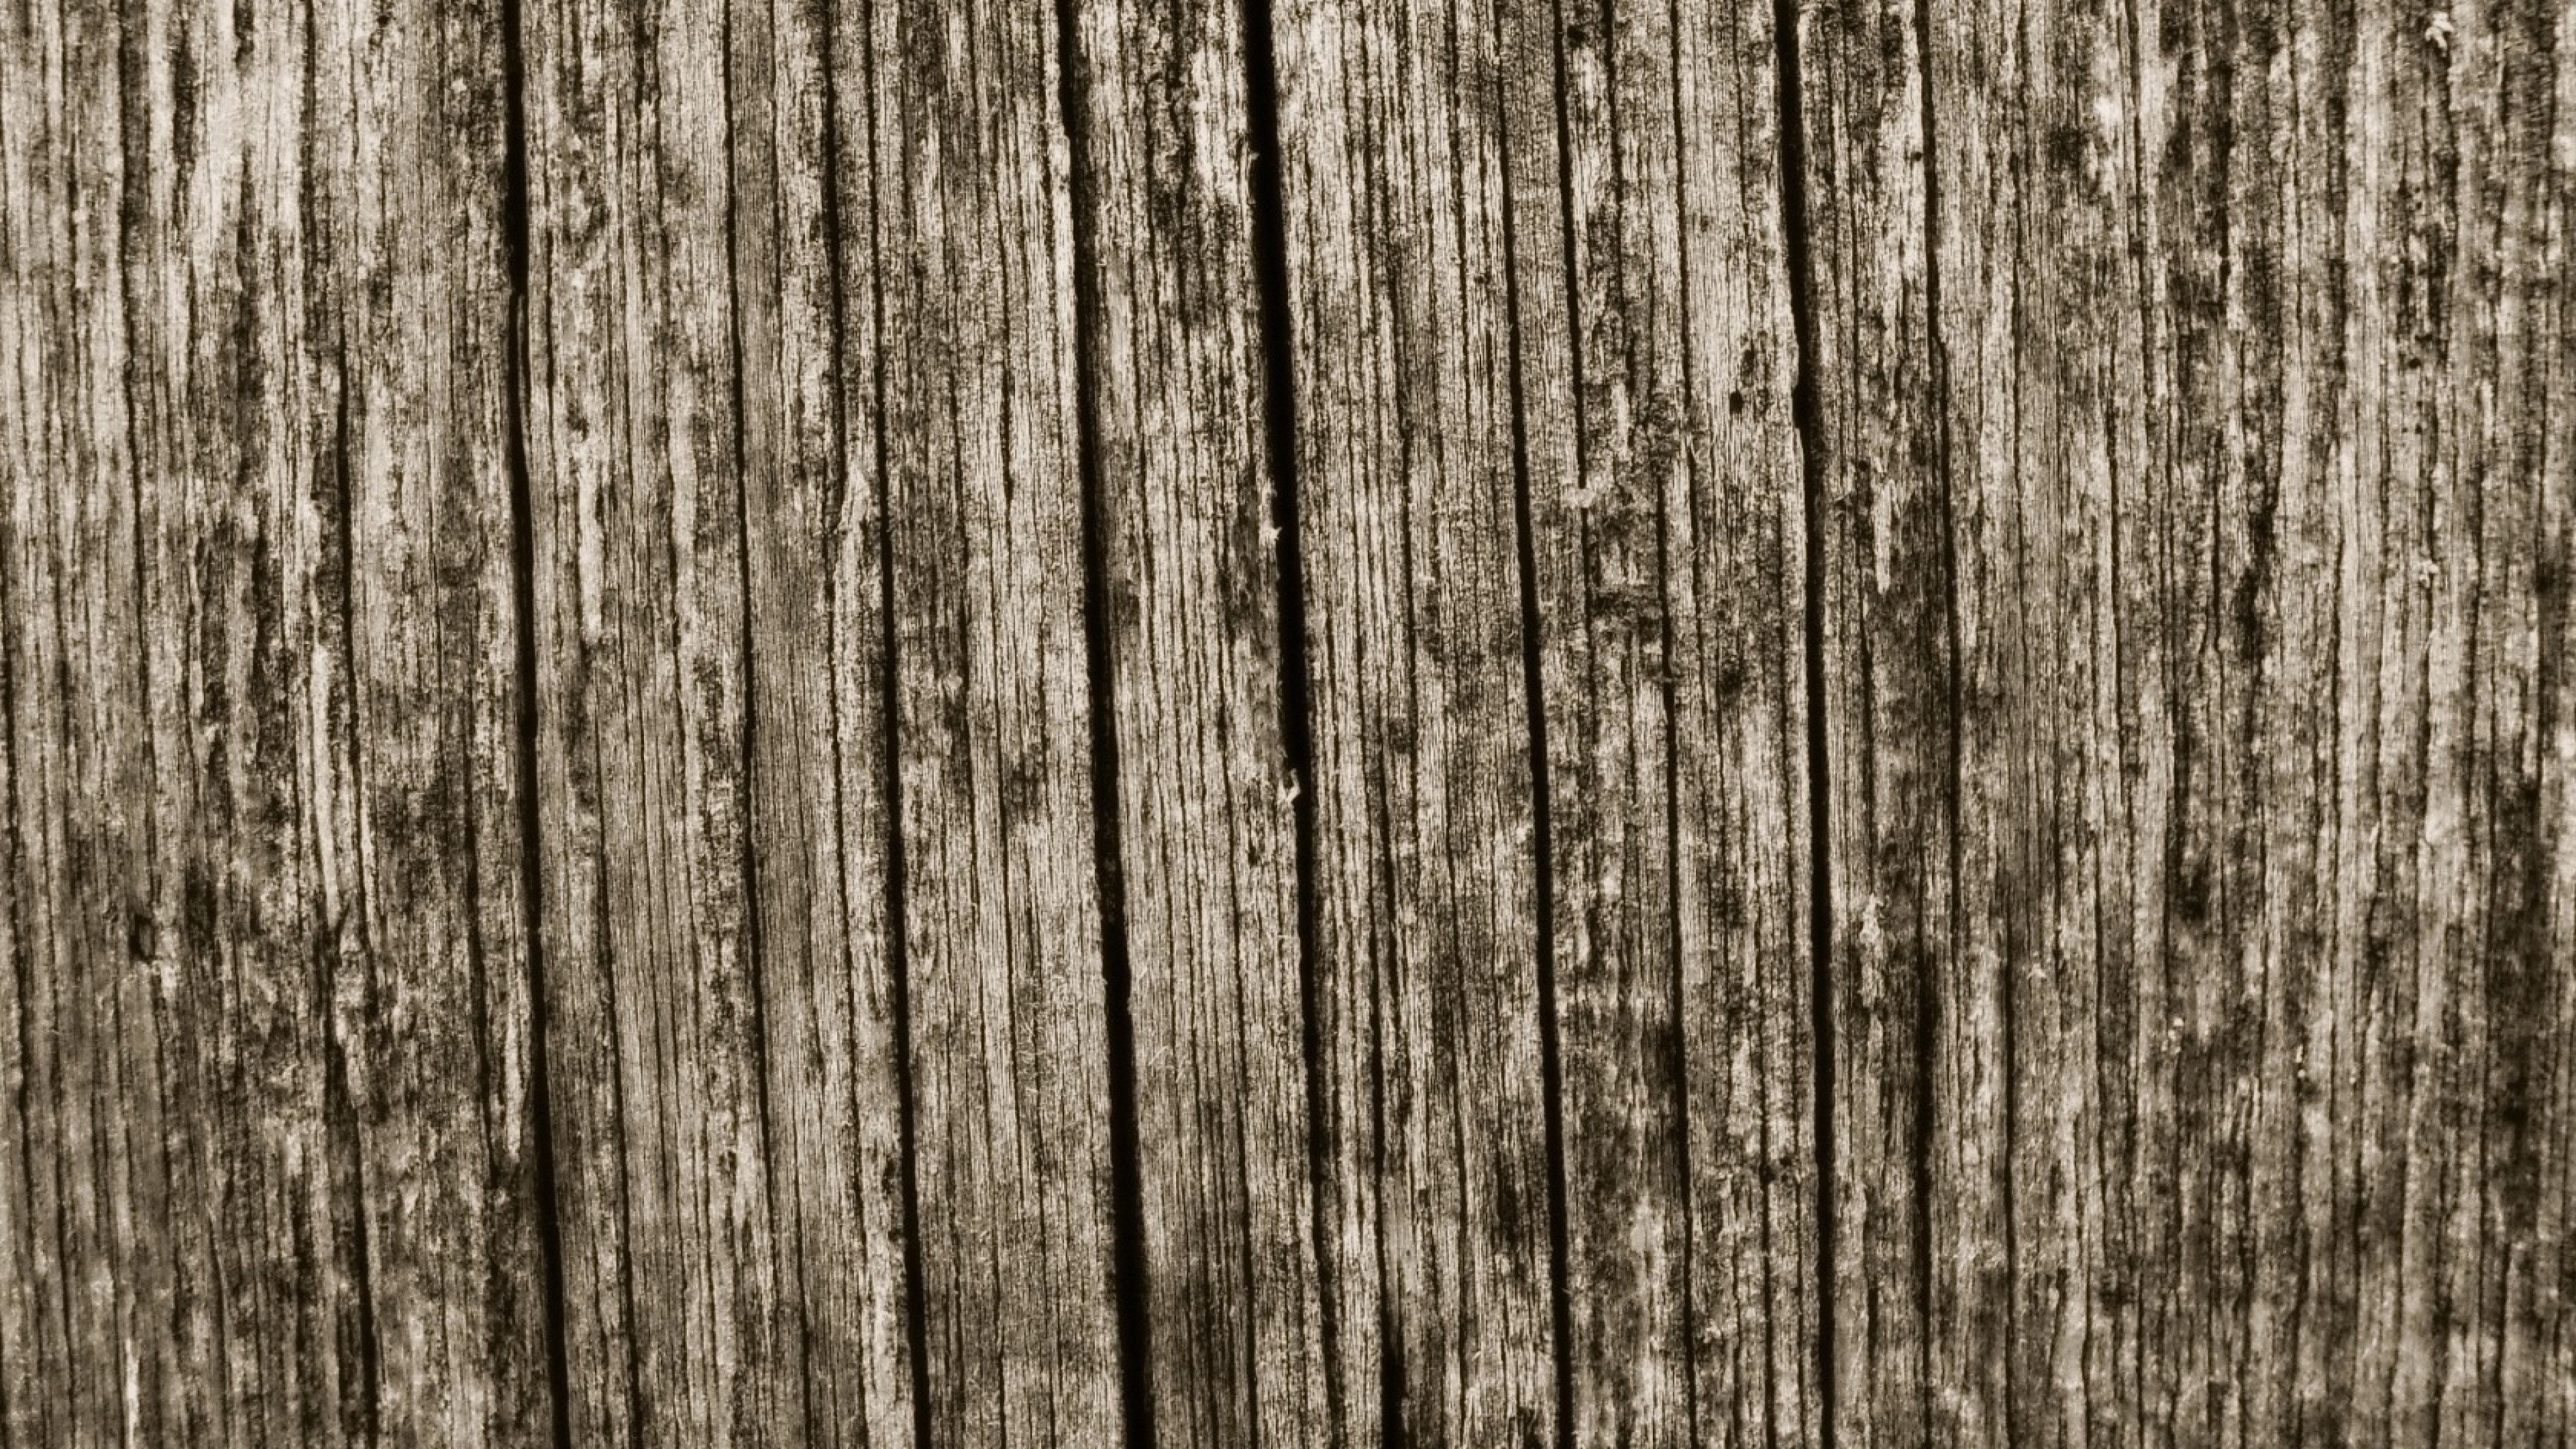 3840x2160 Wood board crack backgrounds wallpapers HD.